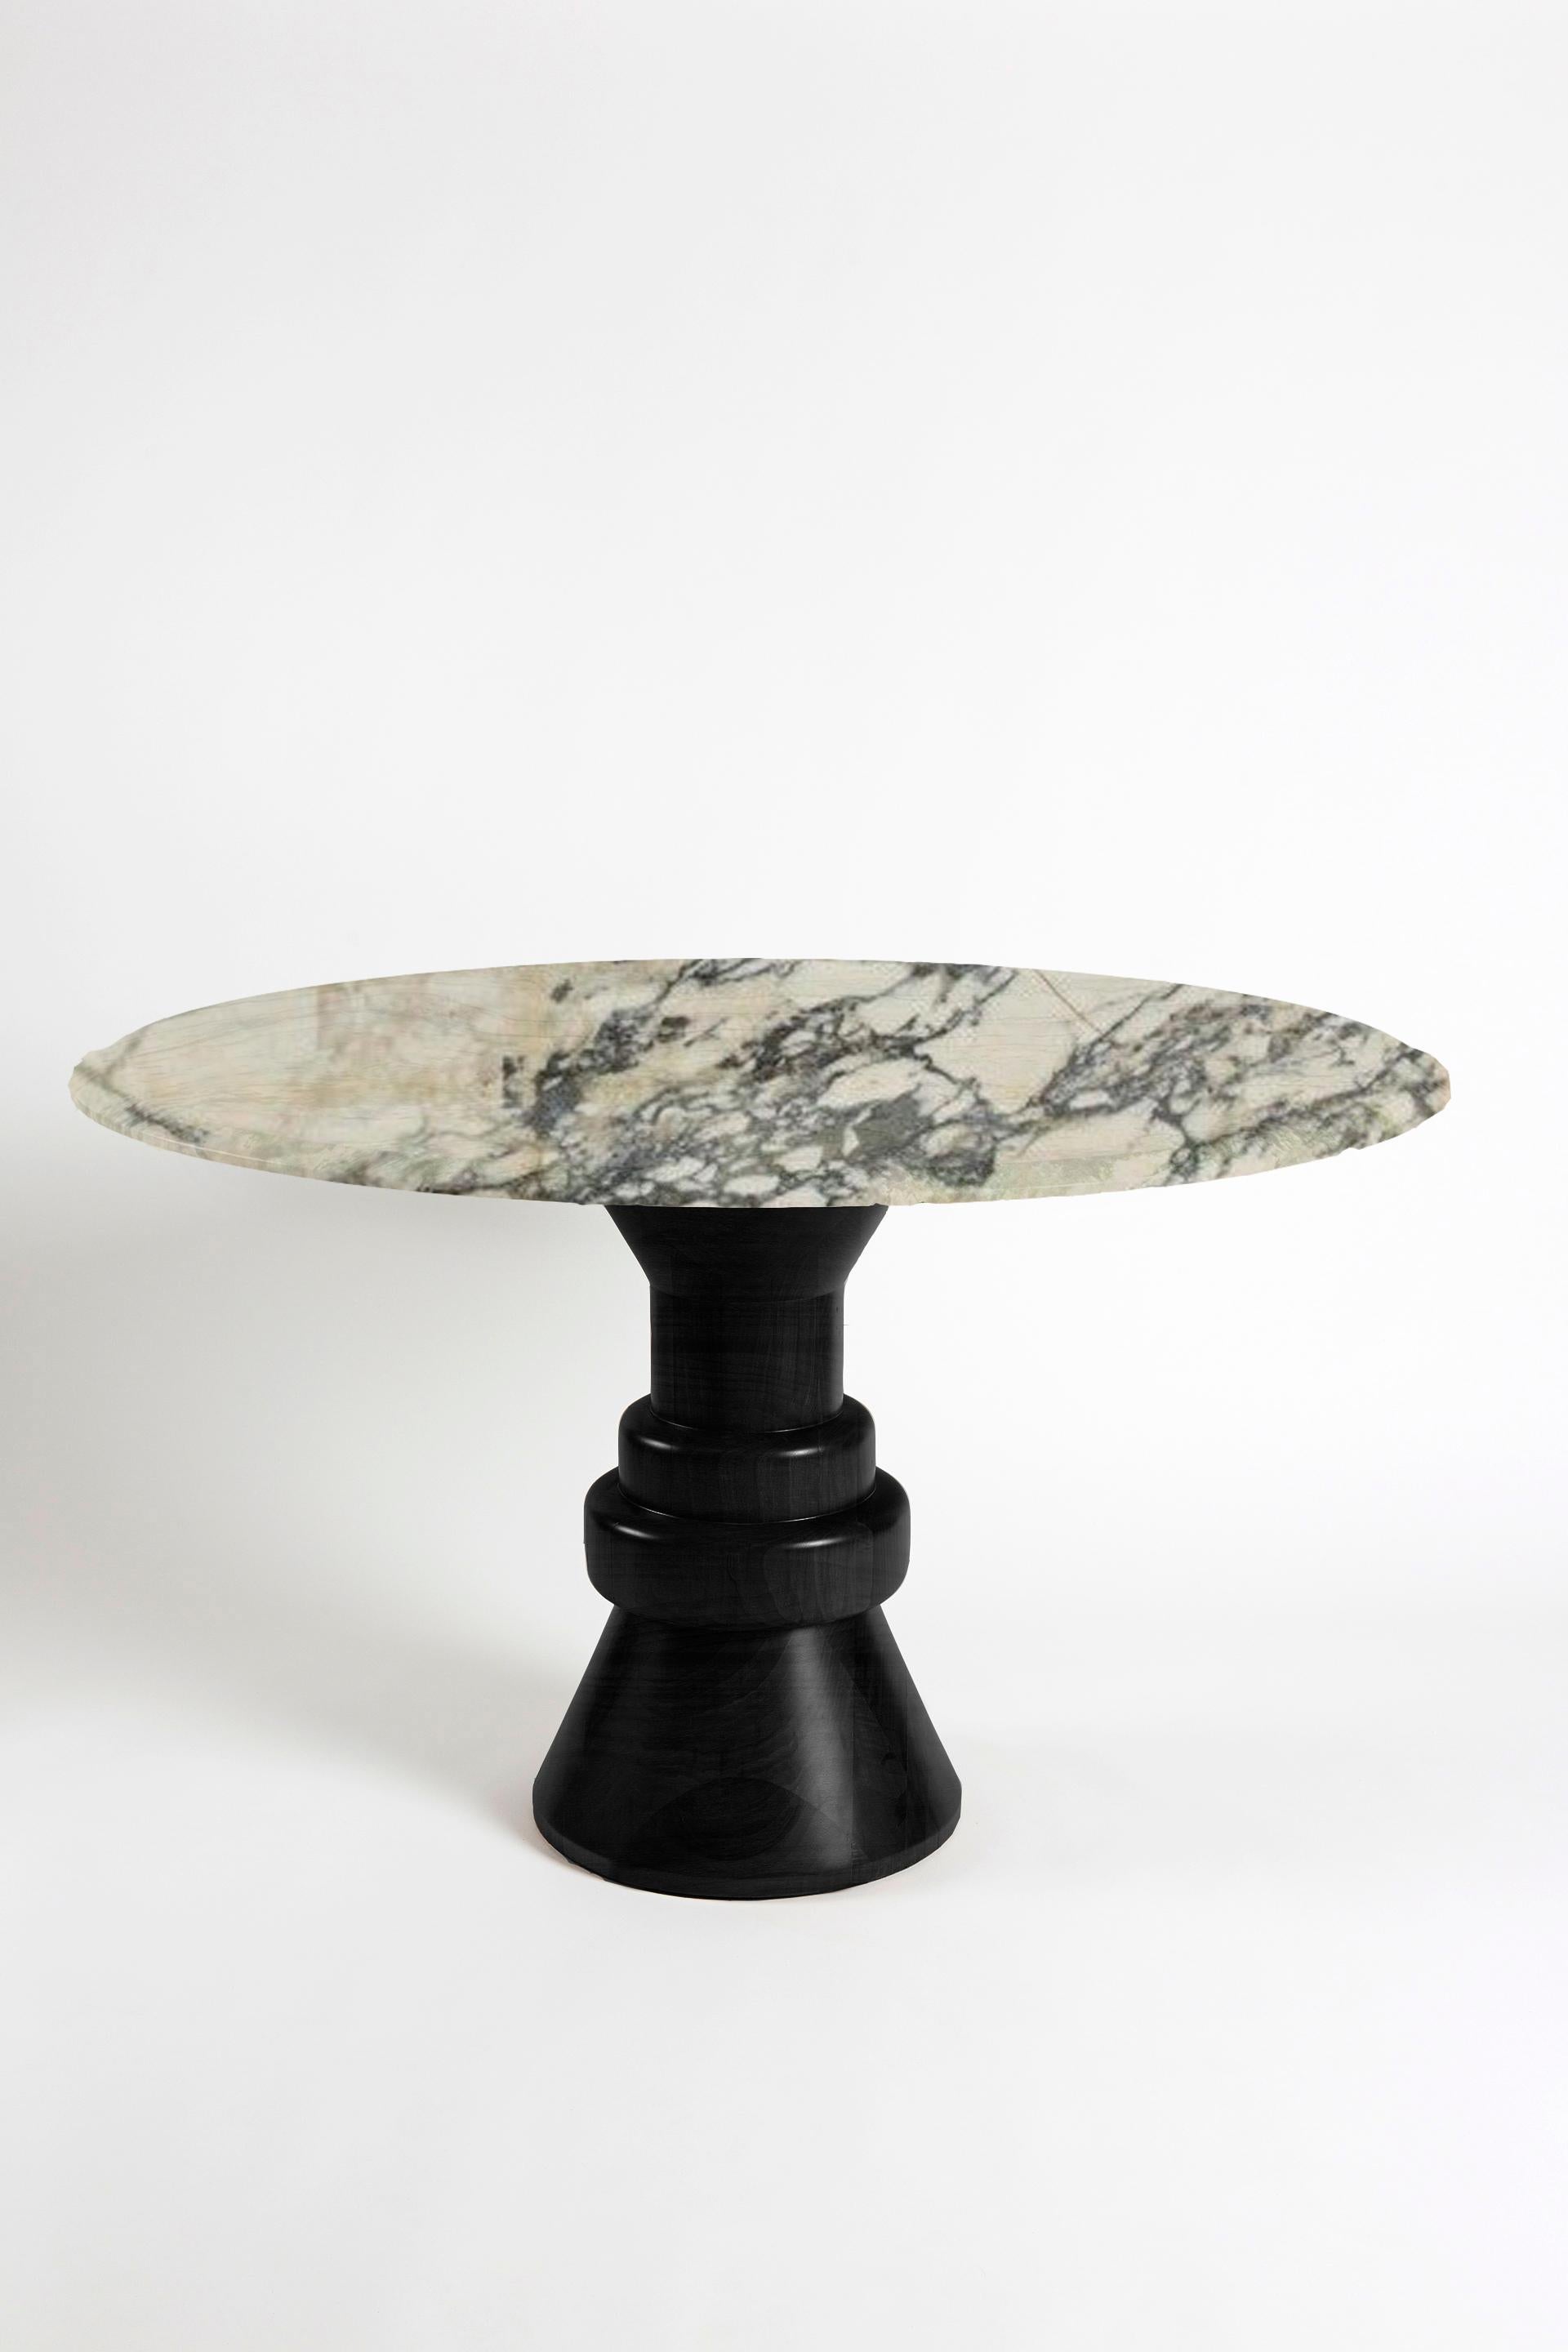 21st Century Green Marble Round Dining Table with Sculptural Wooden Base For Sale 1